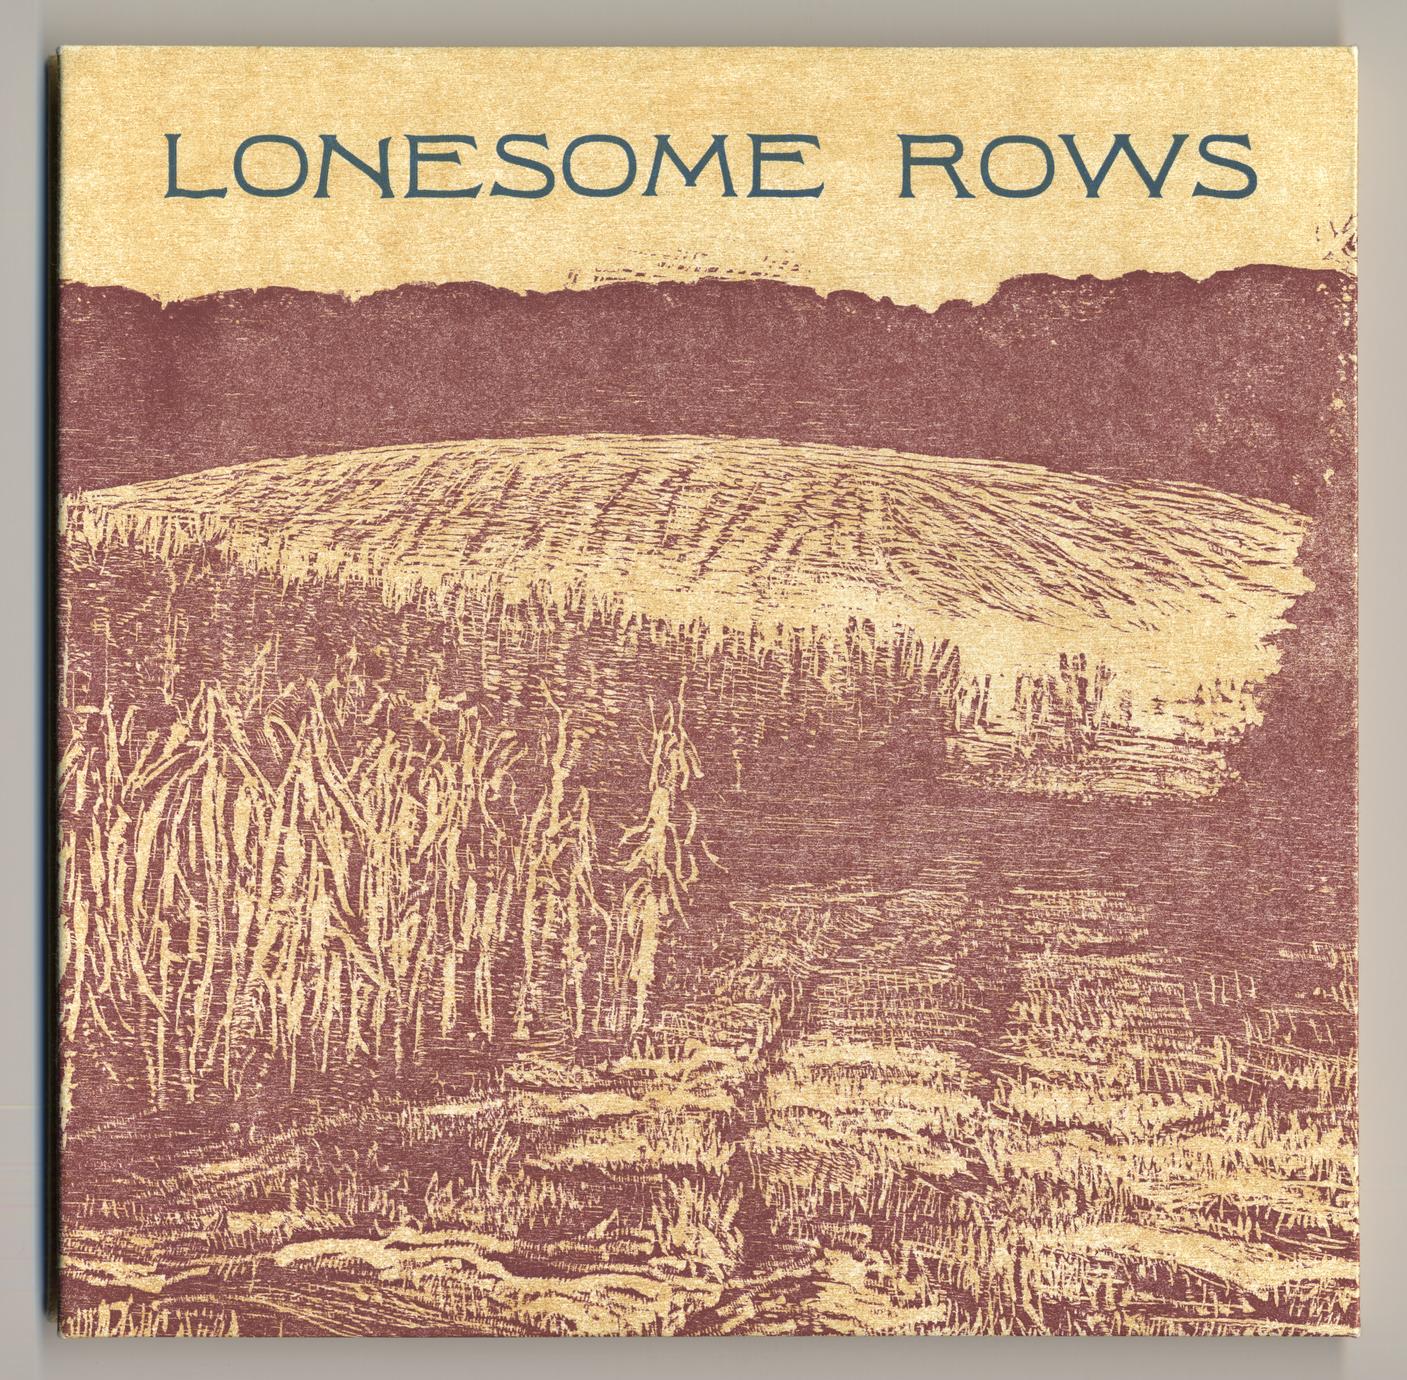 Lonesome rows (1 of 2)